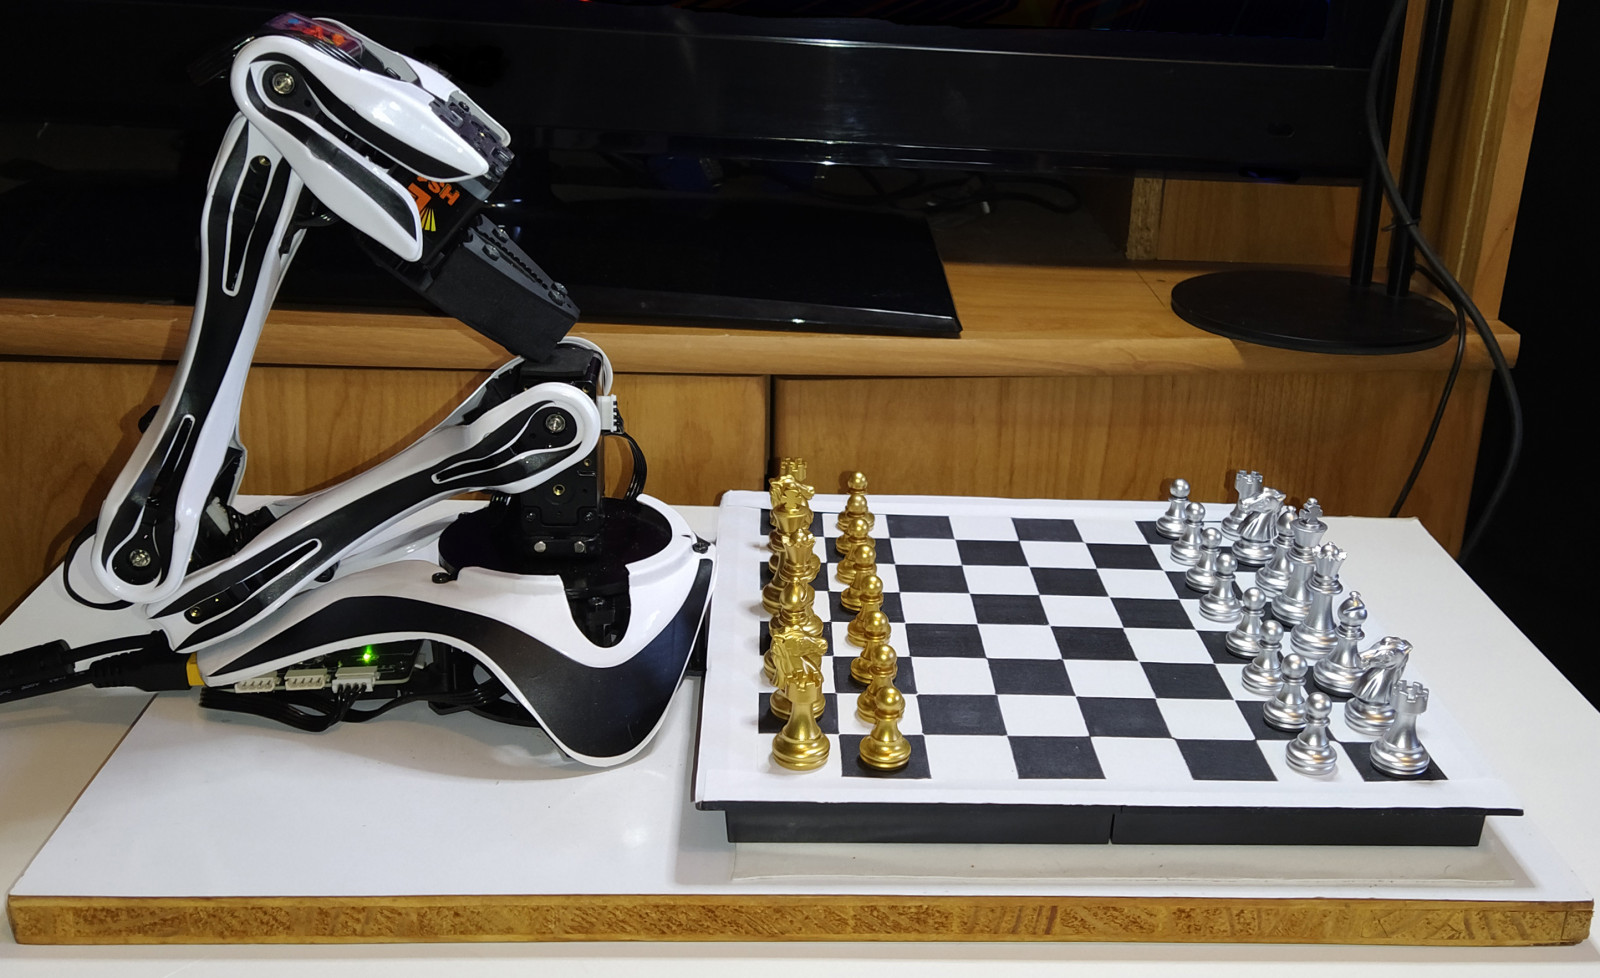 Homemade Chess Robot : 11 Steps (with Pictures) - Instructables